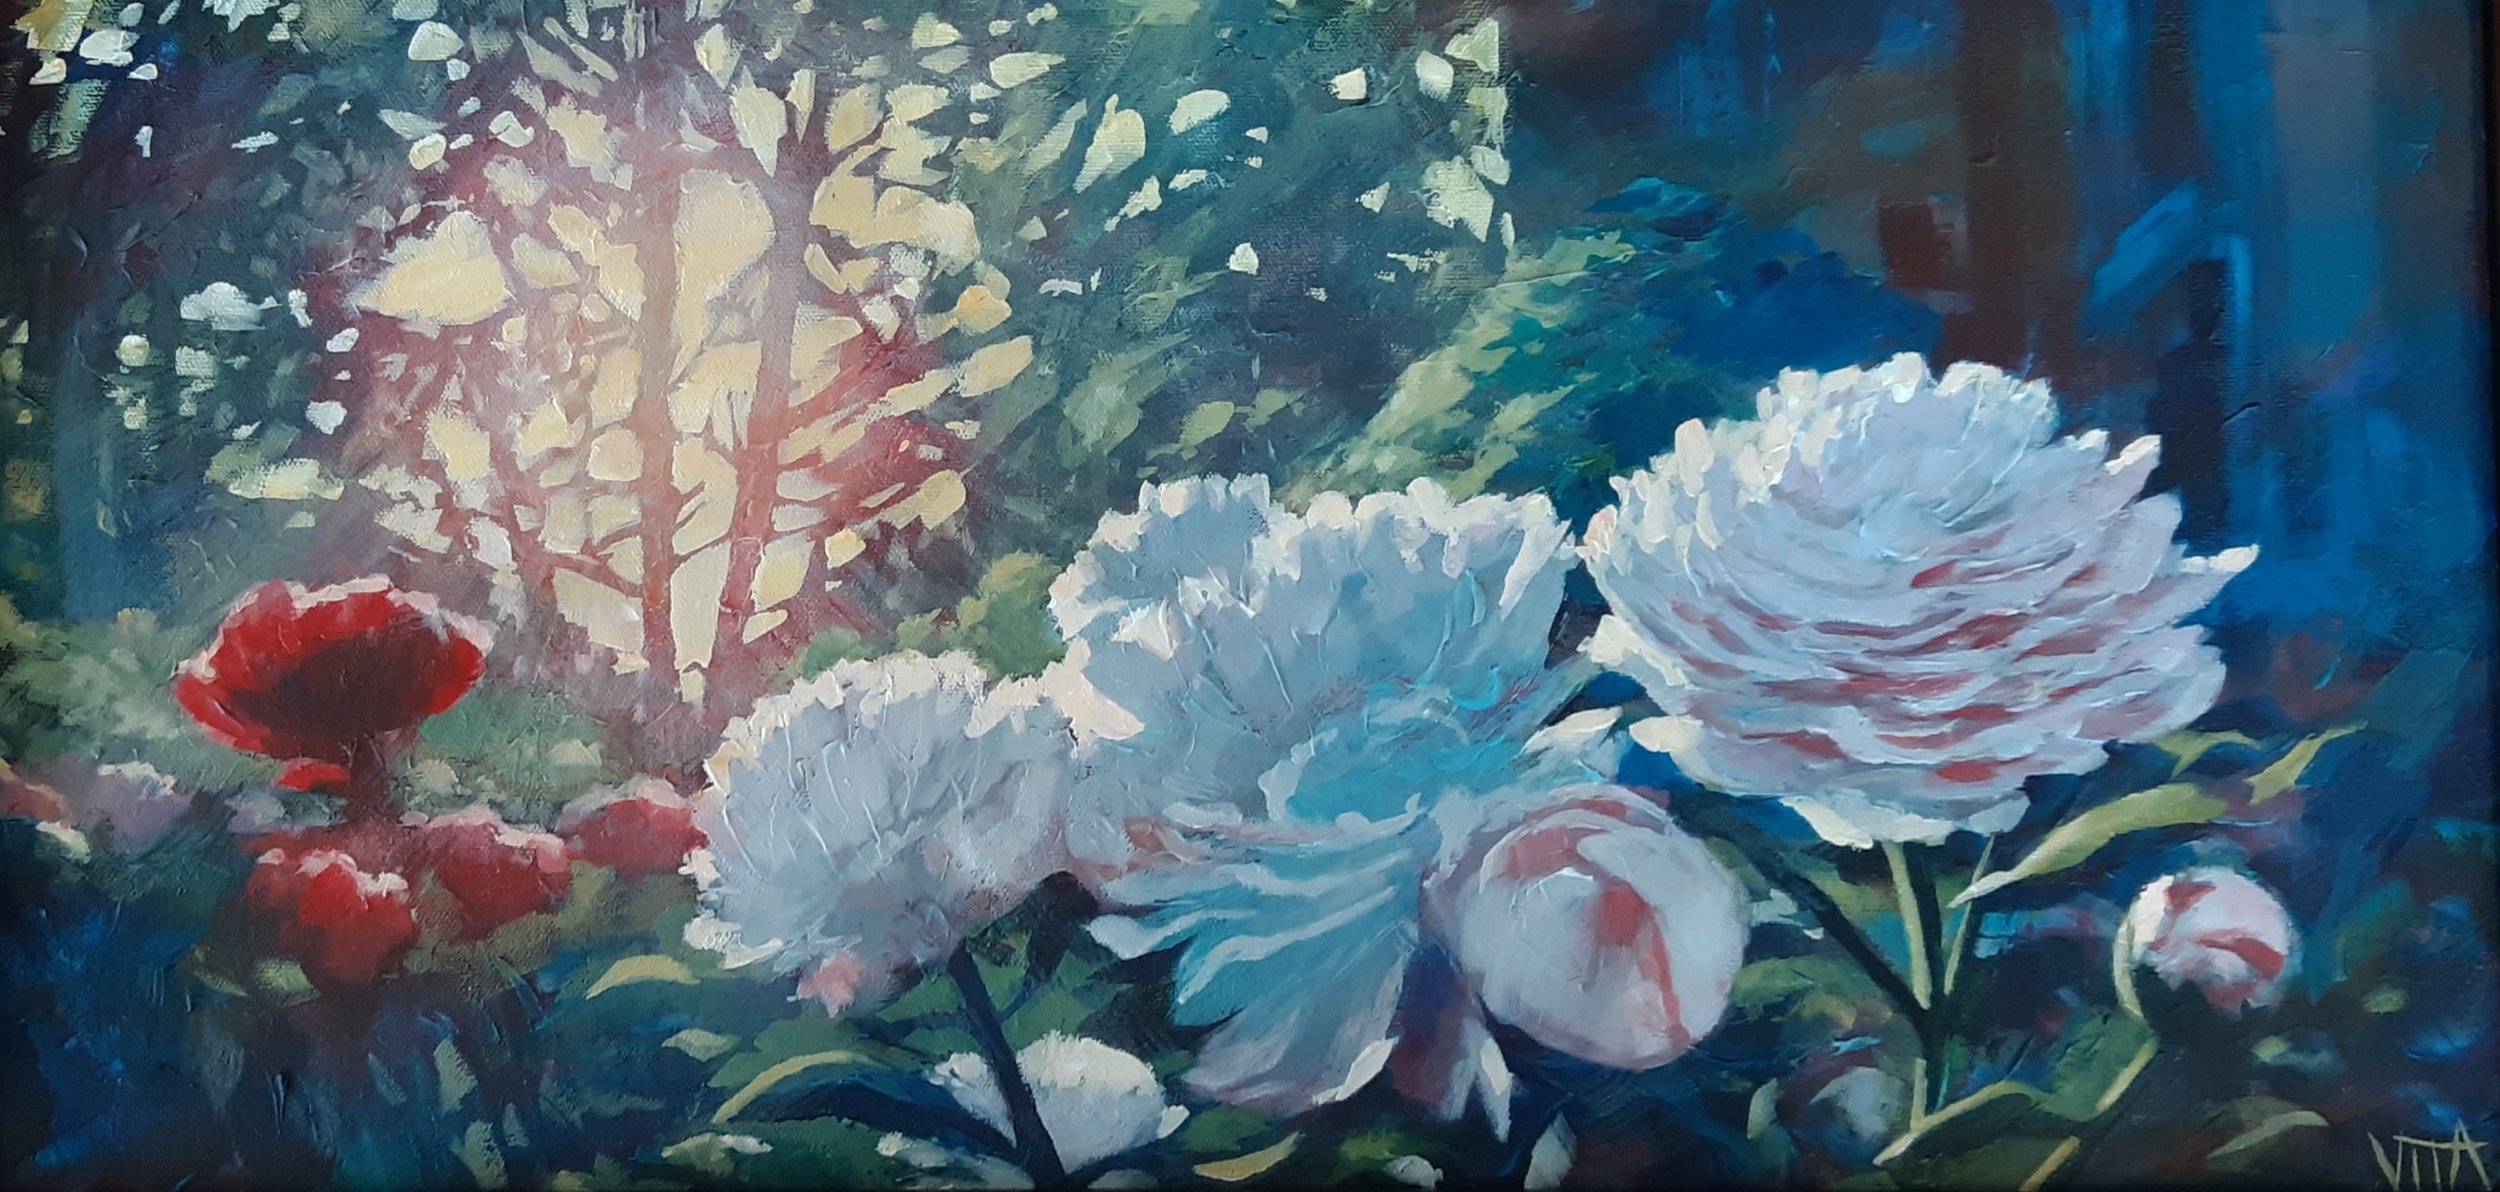 SOLD, Peonies in the Shade Painting, Acrylic on Canvas, Copyright 2021 Hirschten